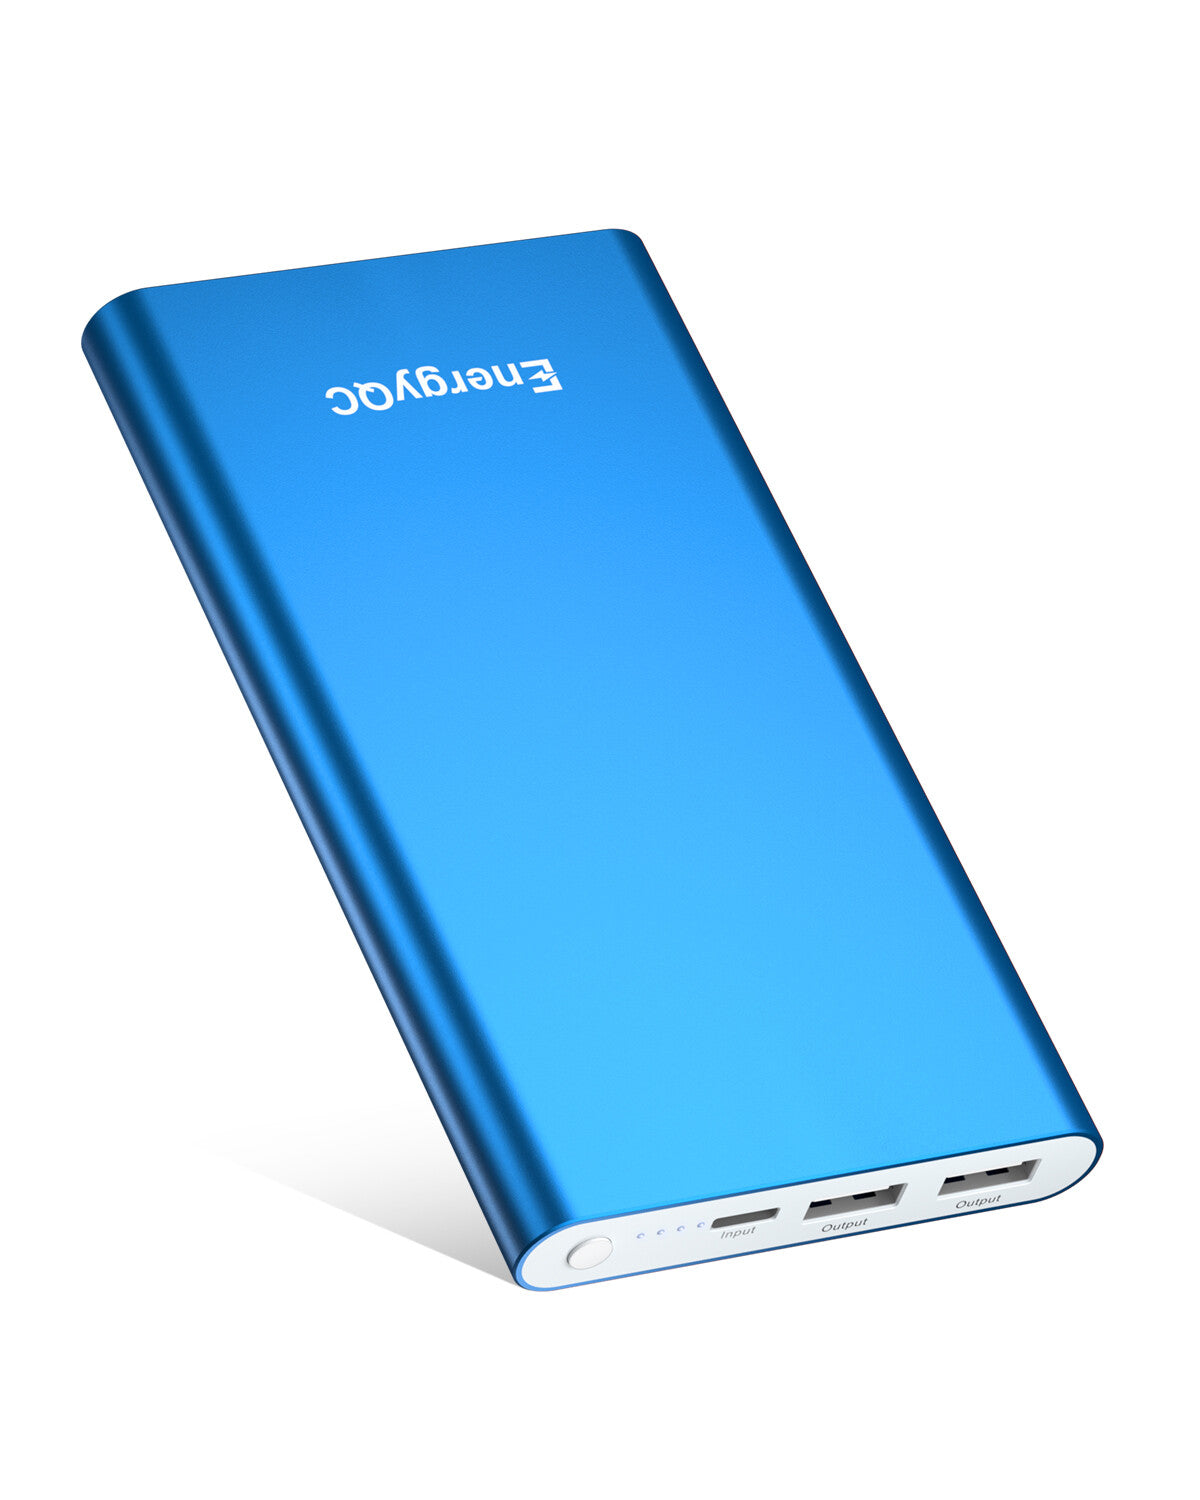 EnergyQC Pilot 4GS Portable Charger, Fast Charging 12000mAh Power Bank Dual 3A High Speed Output External Battery Pack Compatible with iPhone 13/12/11/X Samsung S10 and More